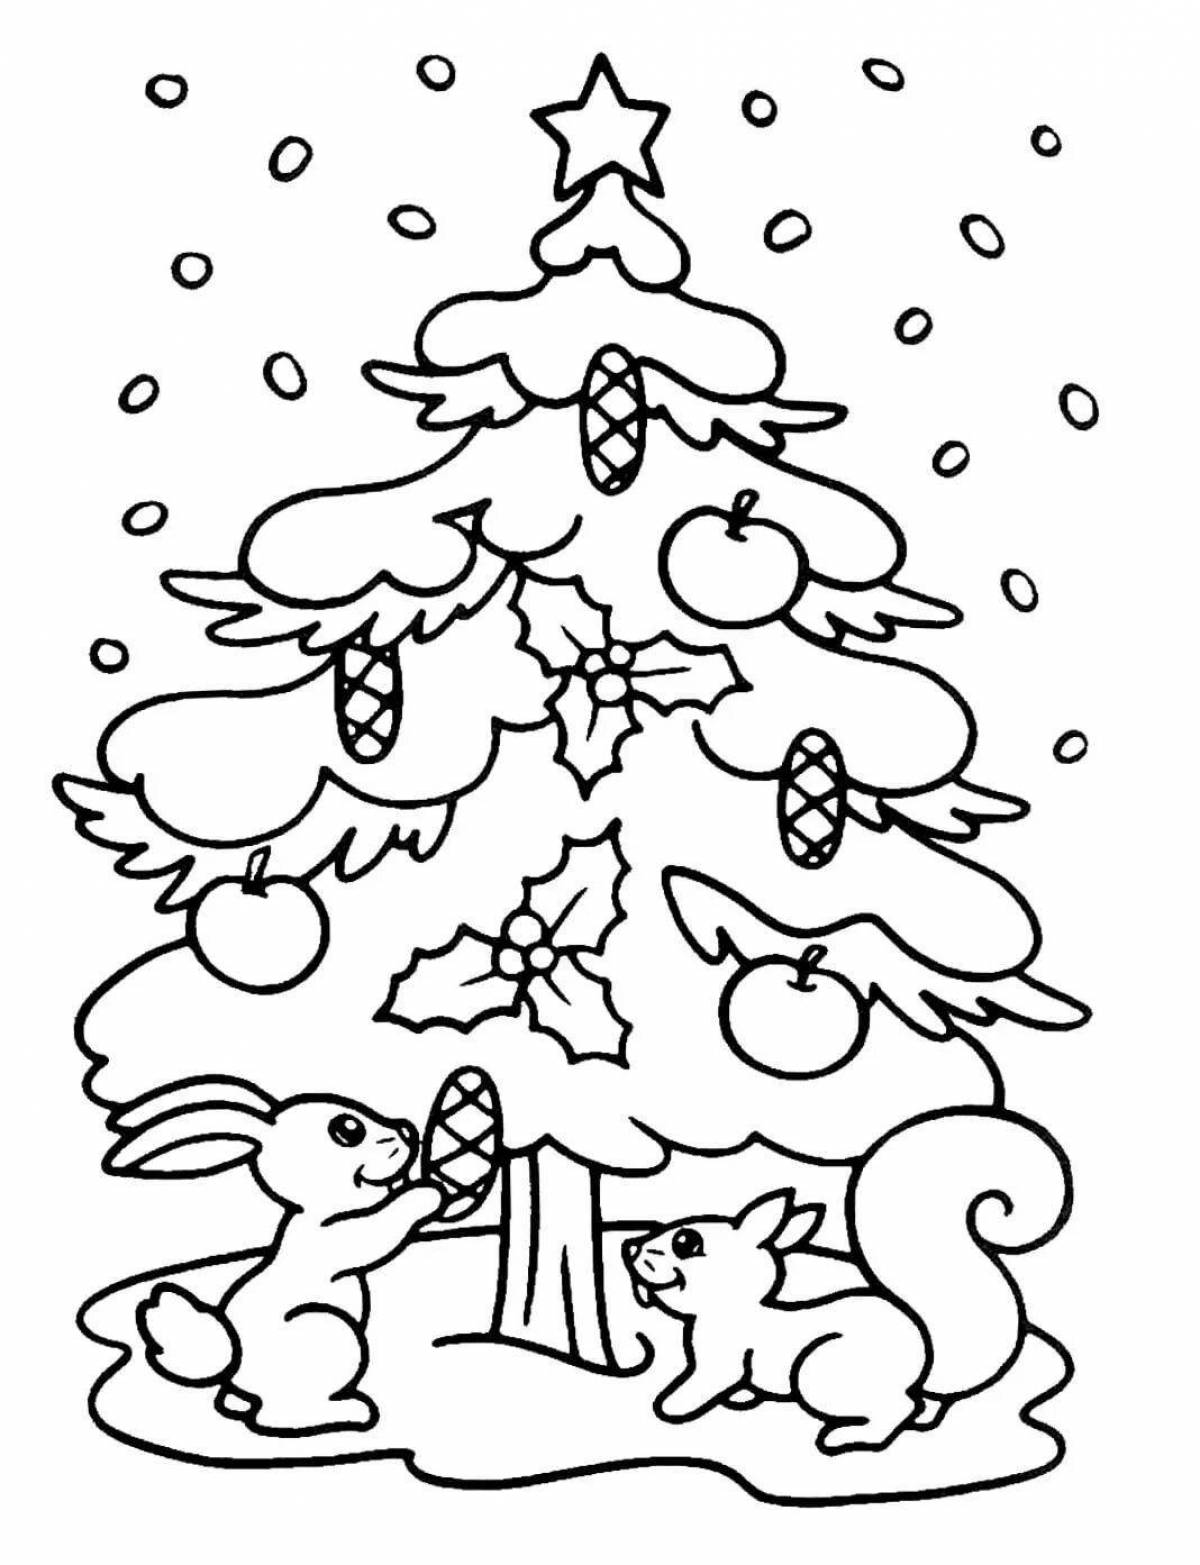 Coloring book joyful Christmas tree for children 5-6 years old